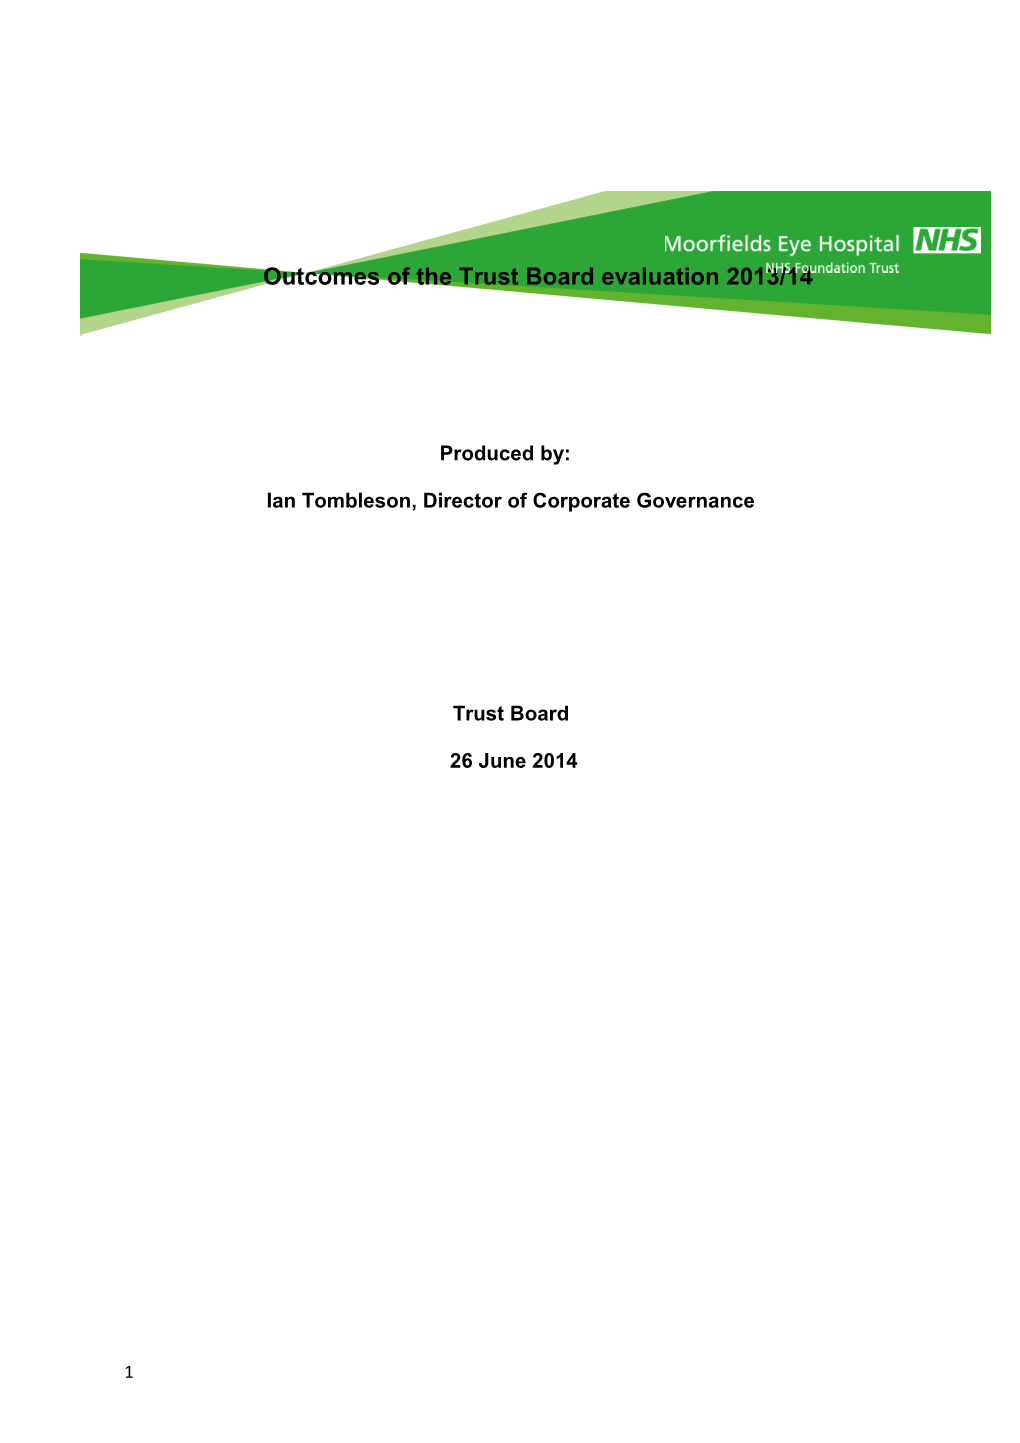 Outcomes of the Trust Board Evaluation 2013/14